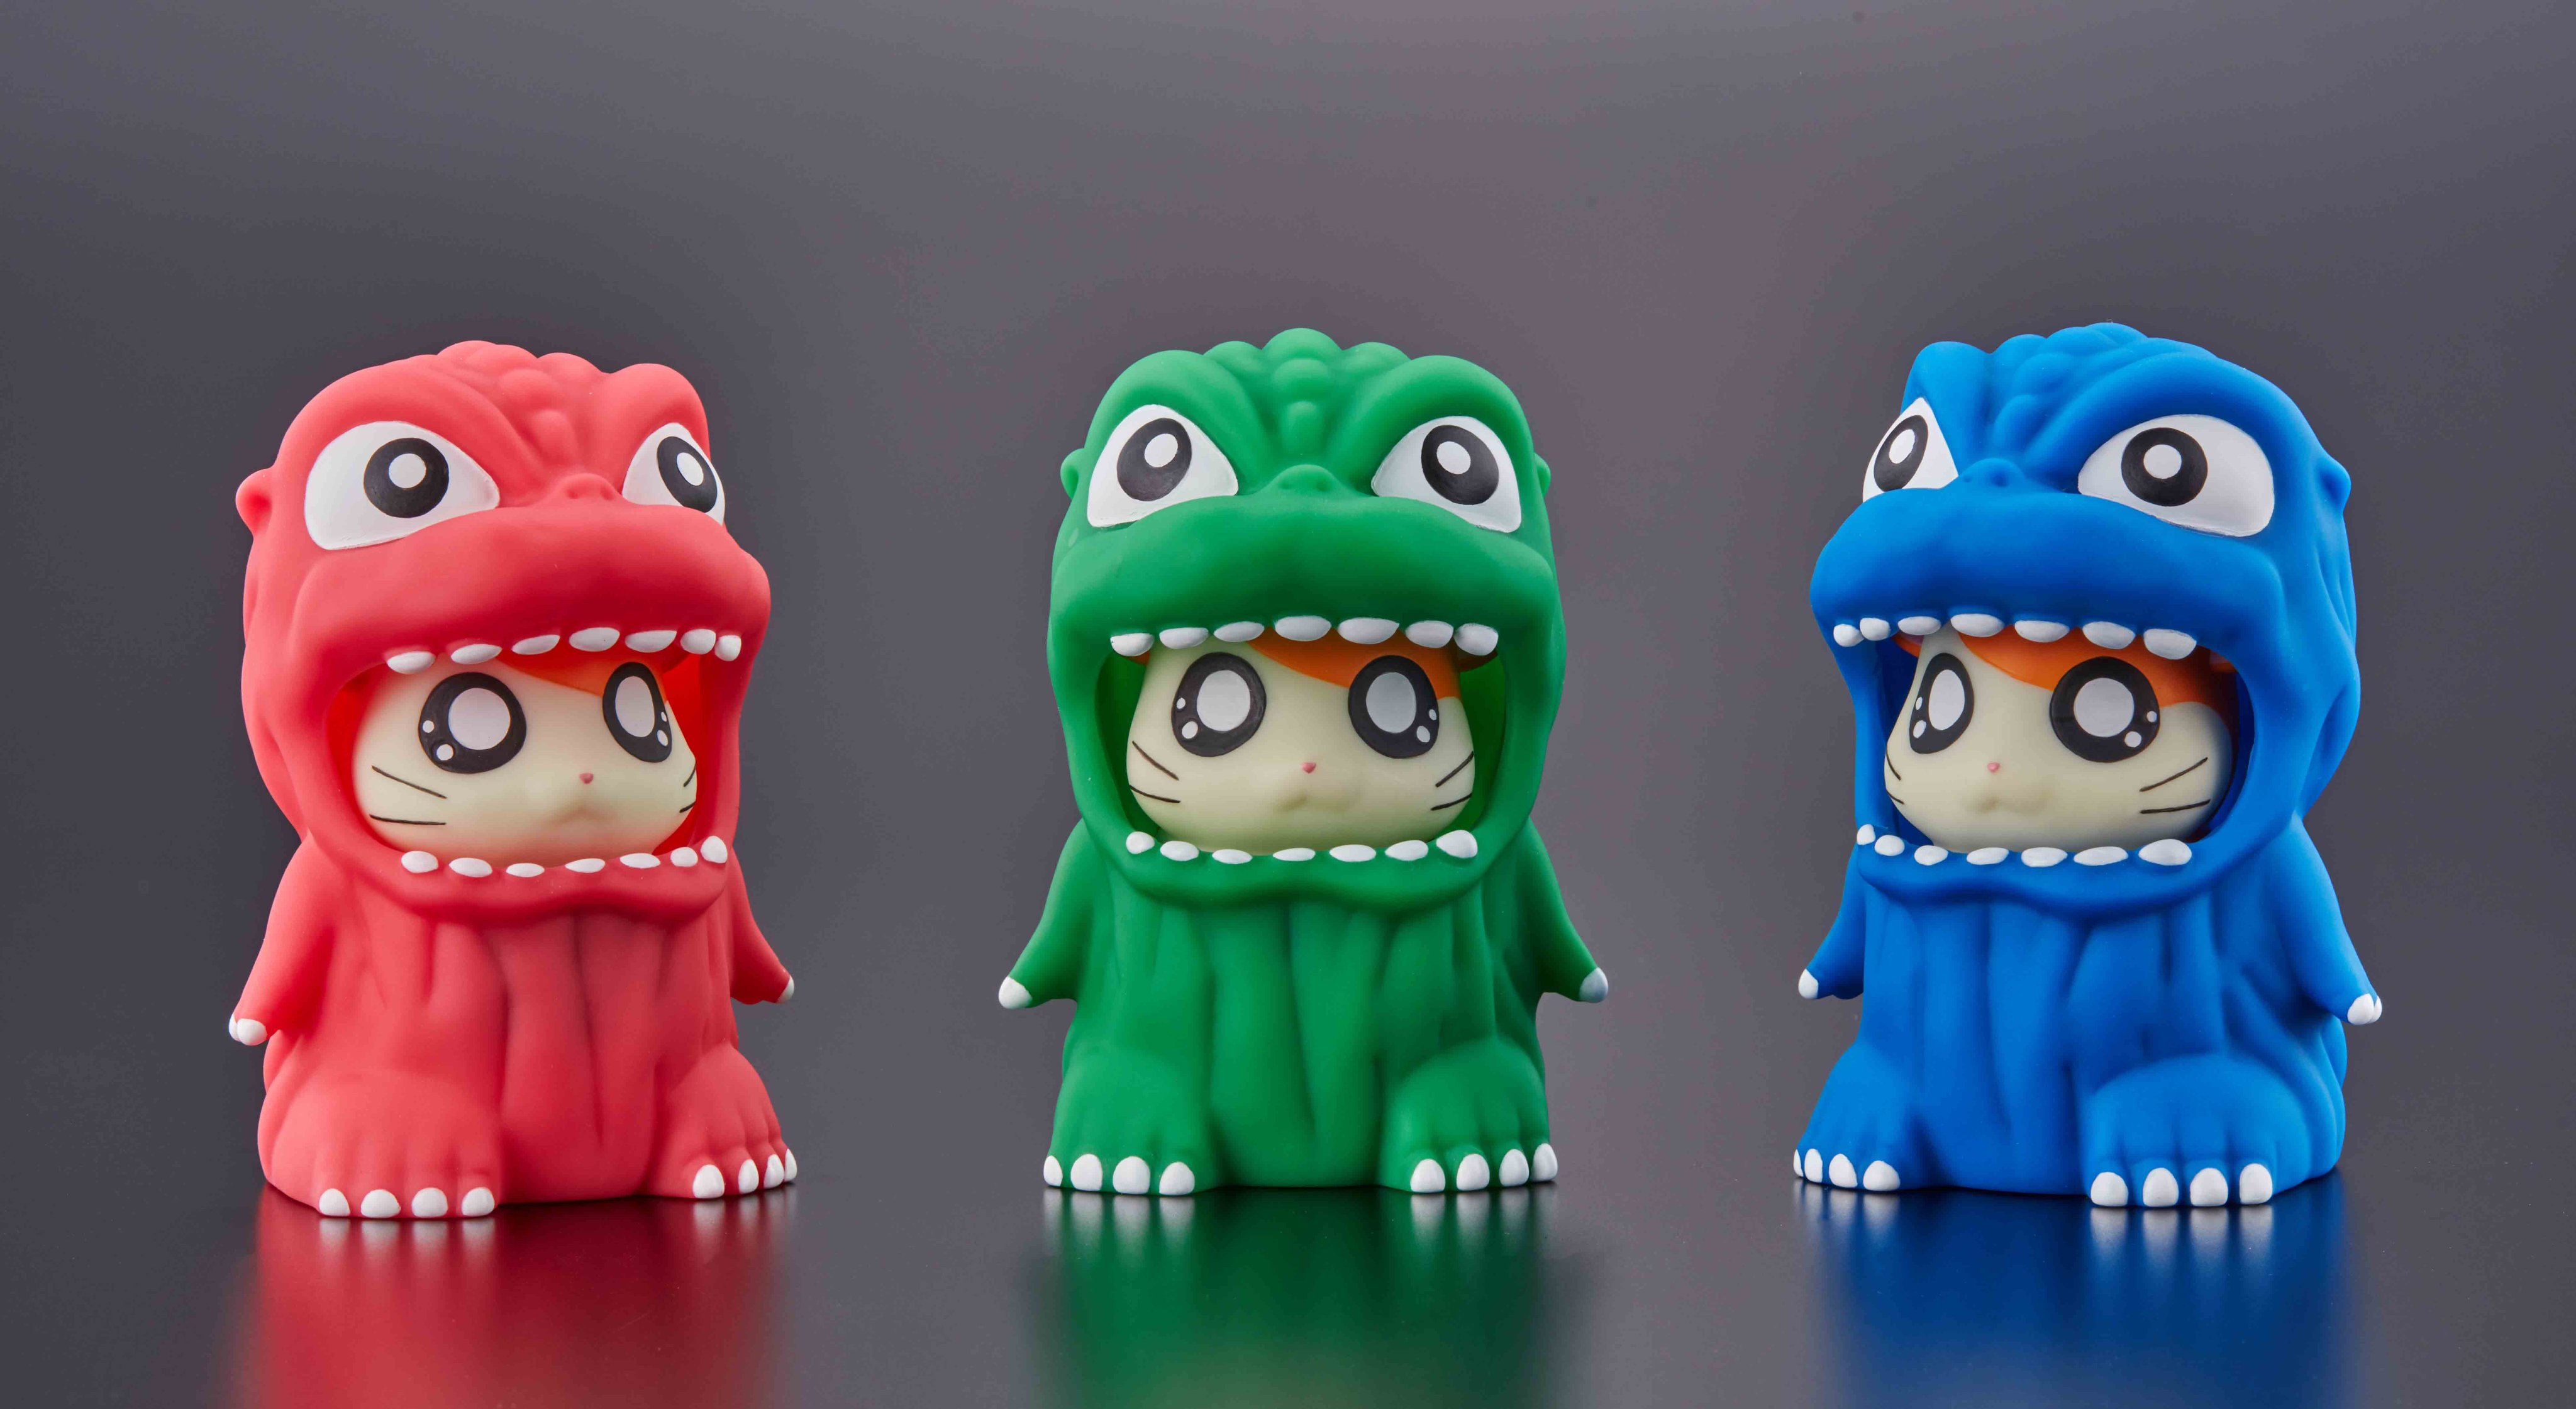 A promotional image featuring three color variants (red, green, and blue) of the Godzihamkun collaboration character, featuring Hamtaro the hamster wearing a cute Godzilla costume.